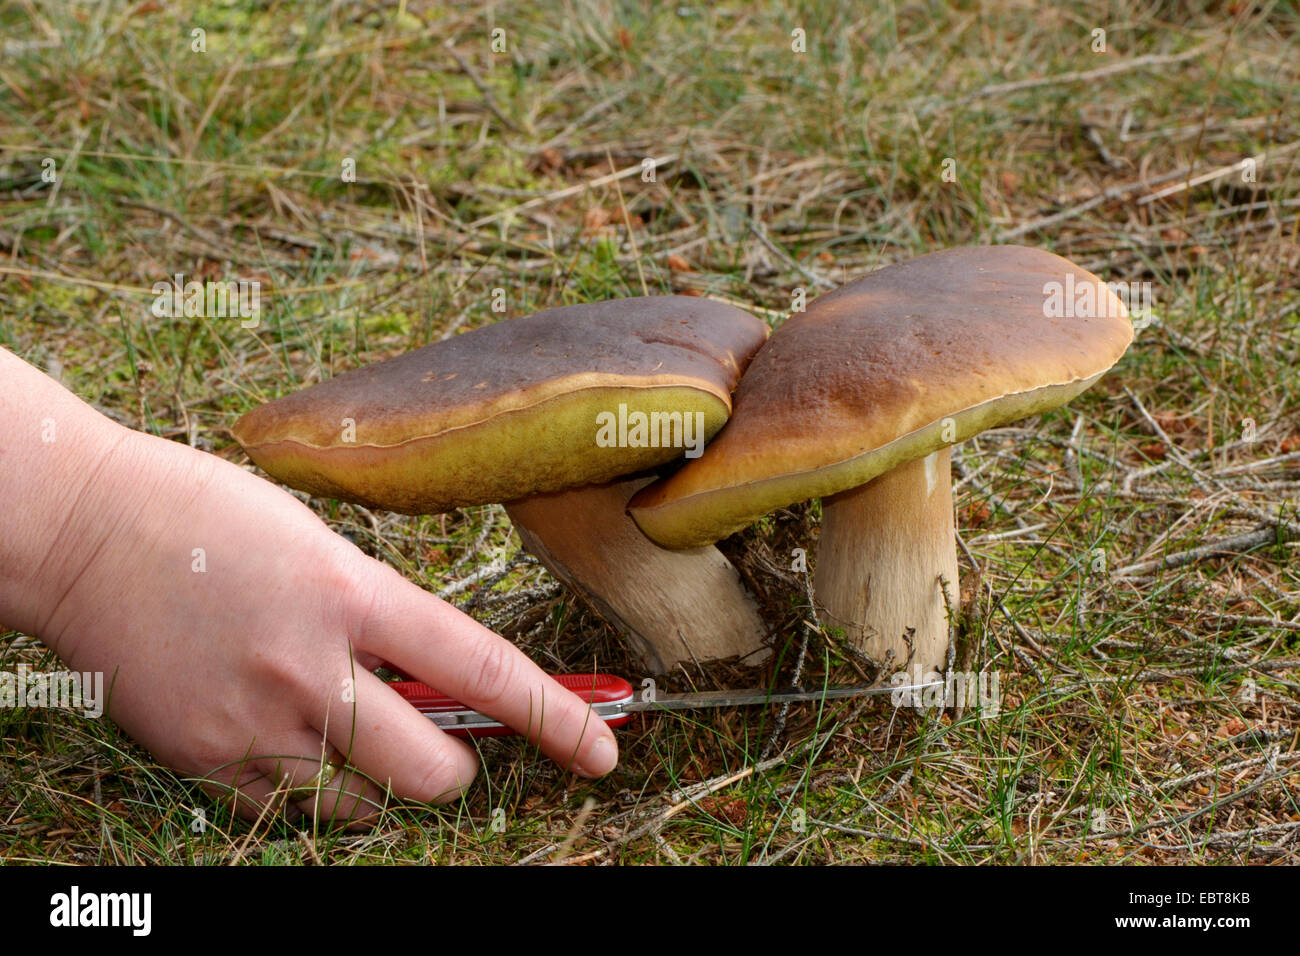 penny bun, cep (Boletus edulis), two exemplars being harvested with a pocket knife, Germany Stock Photo